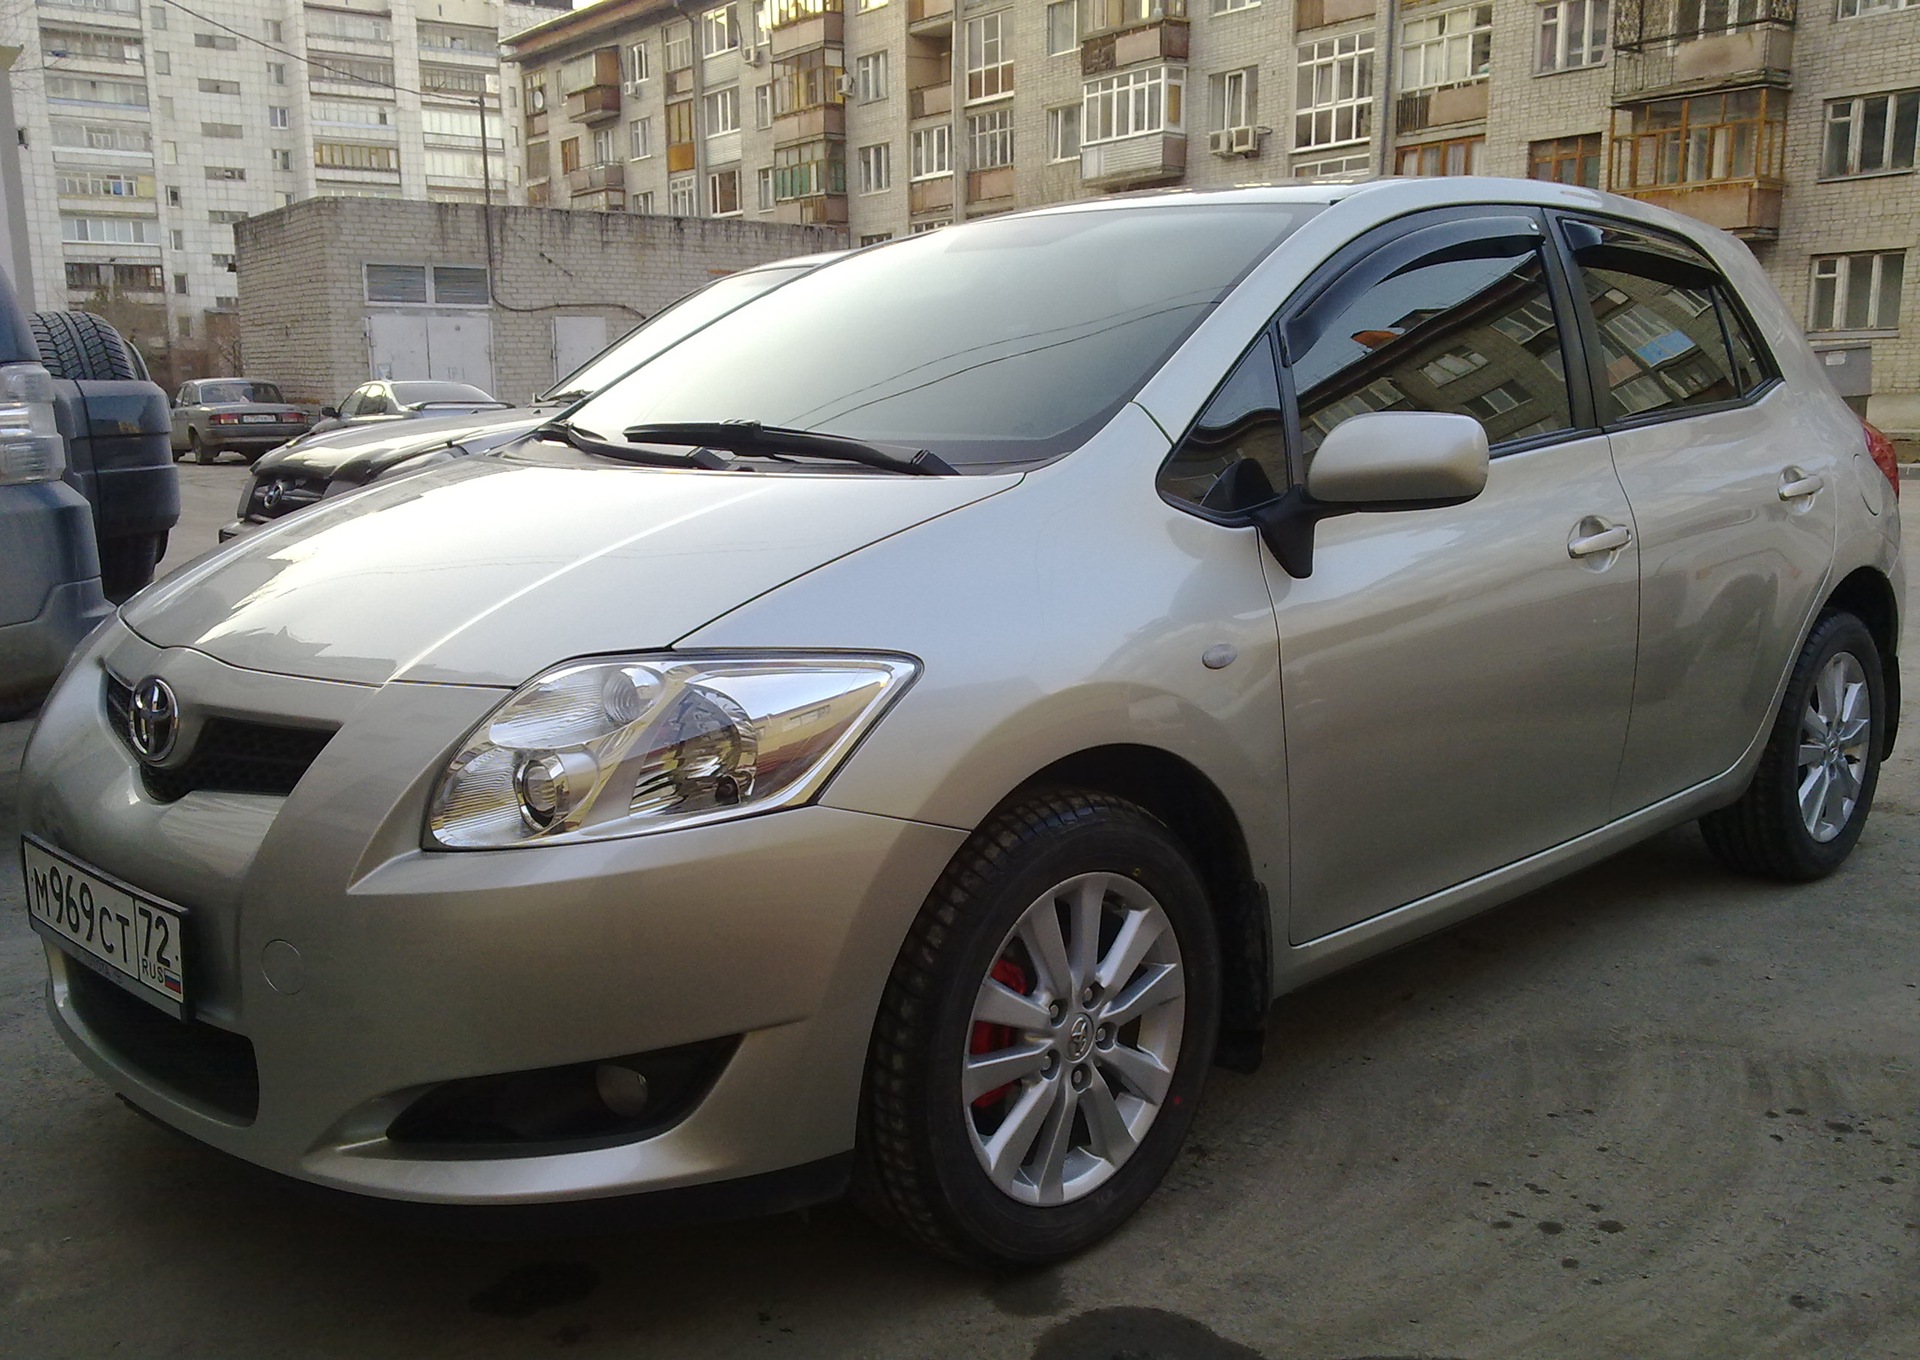 Washed shod painted - Toyota Auris 16 liter 2008